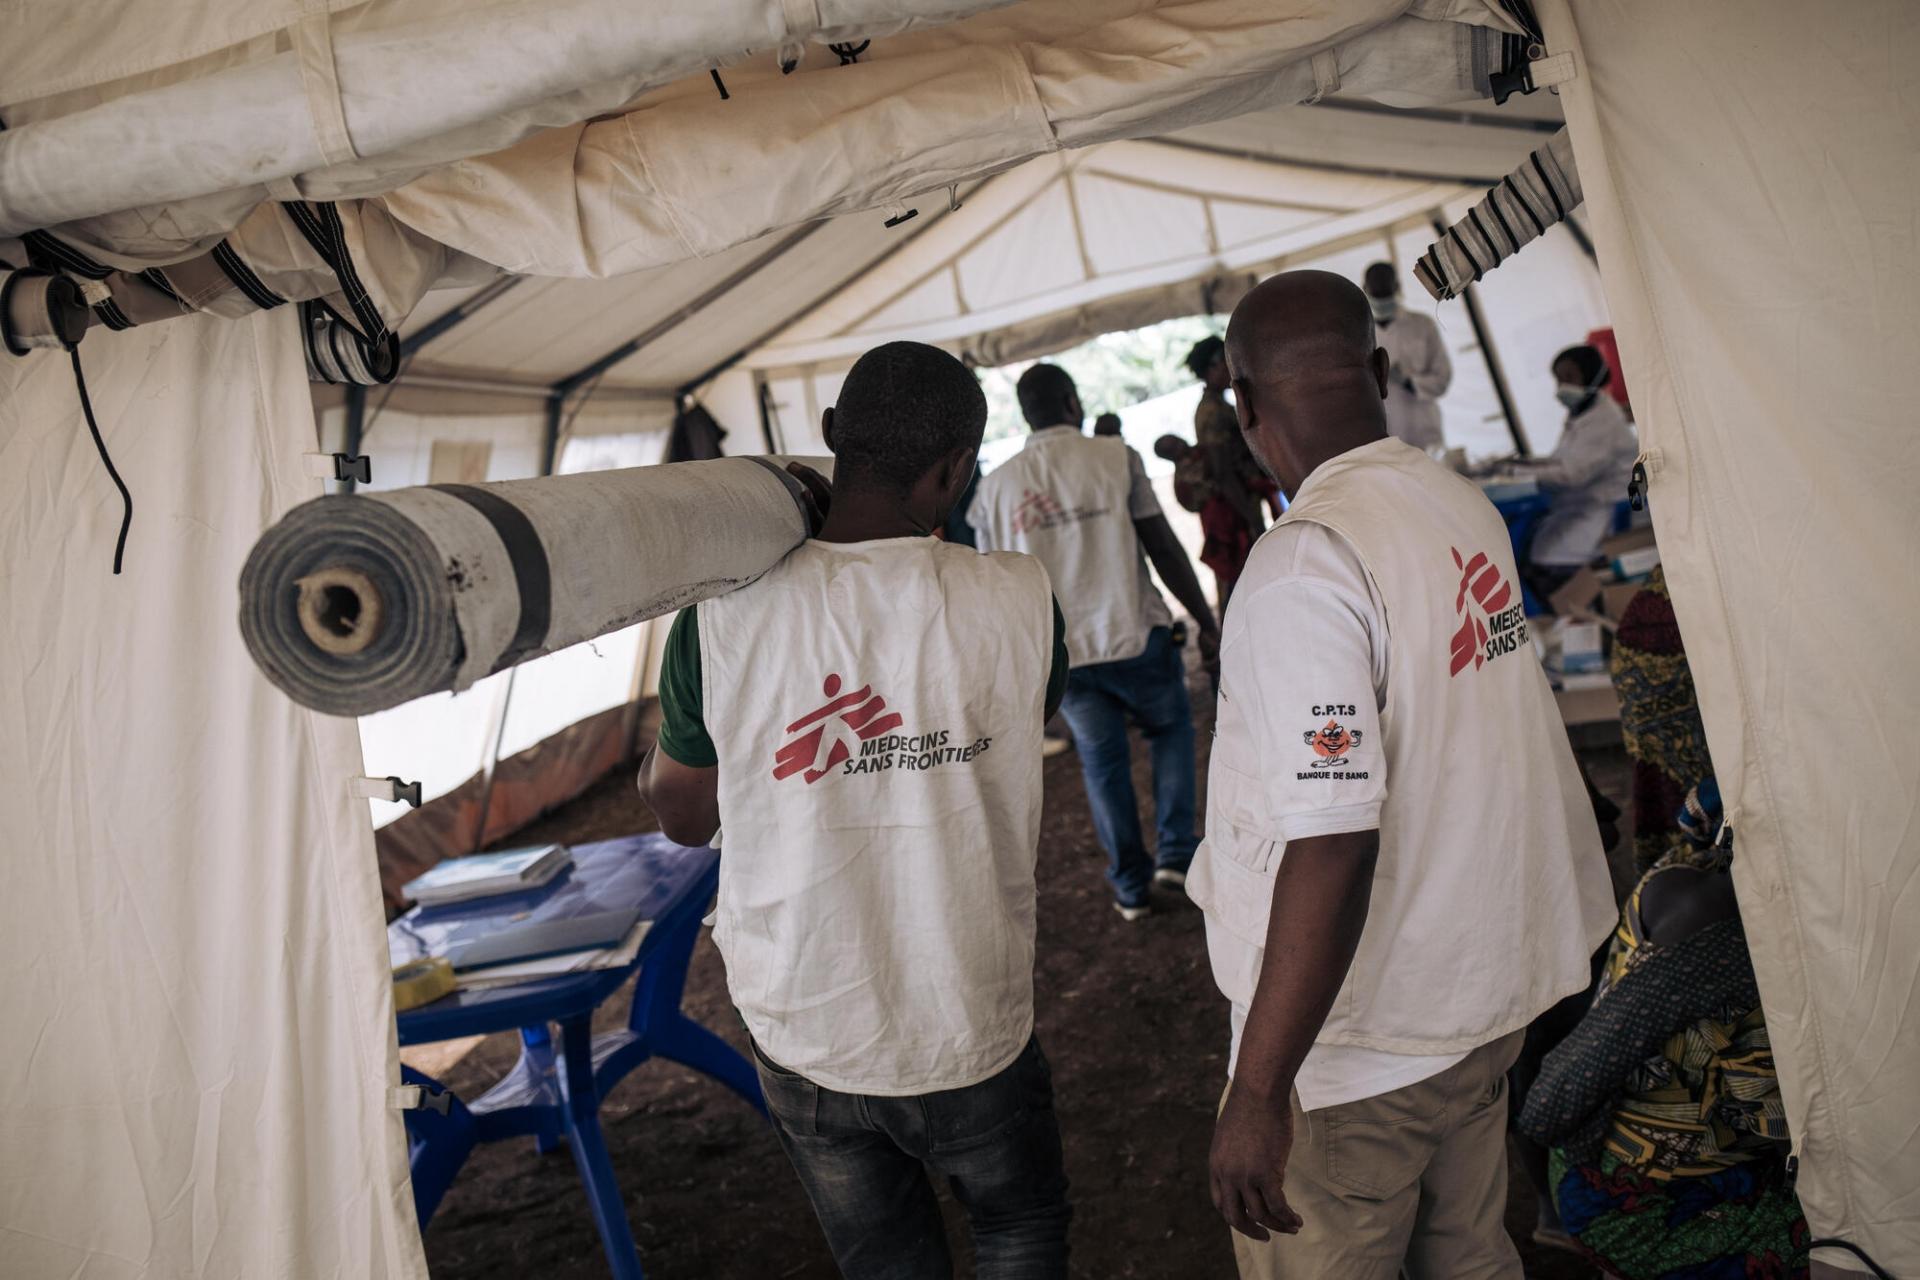 The MSF team is arranging the tents for the mobile clinic where medical consultations take place in Rumangabo.